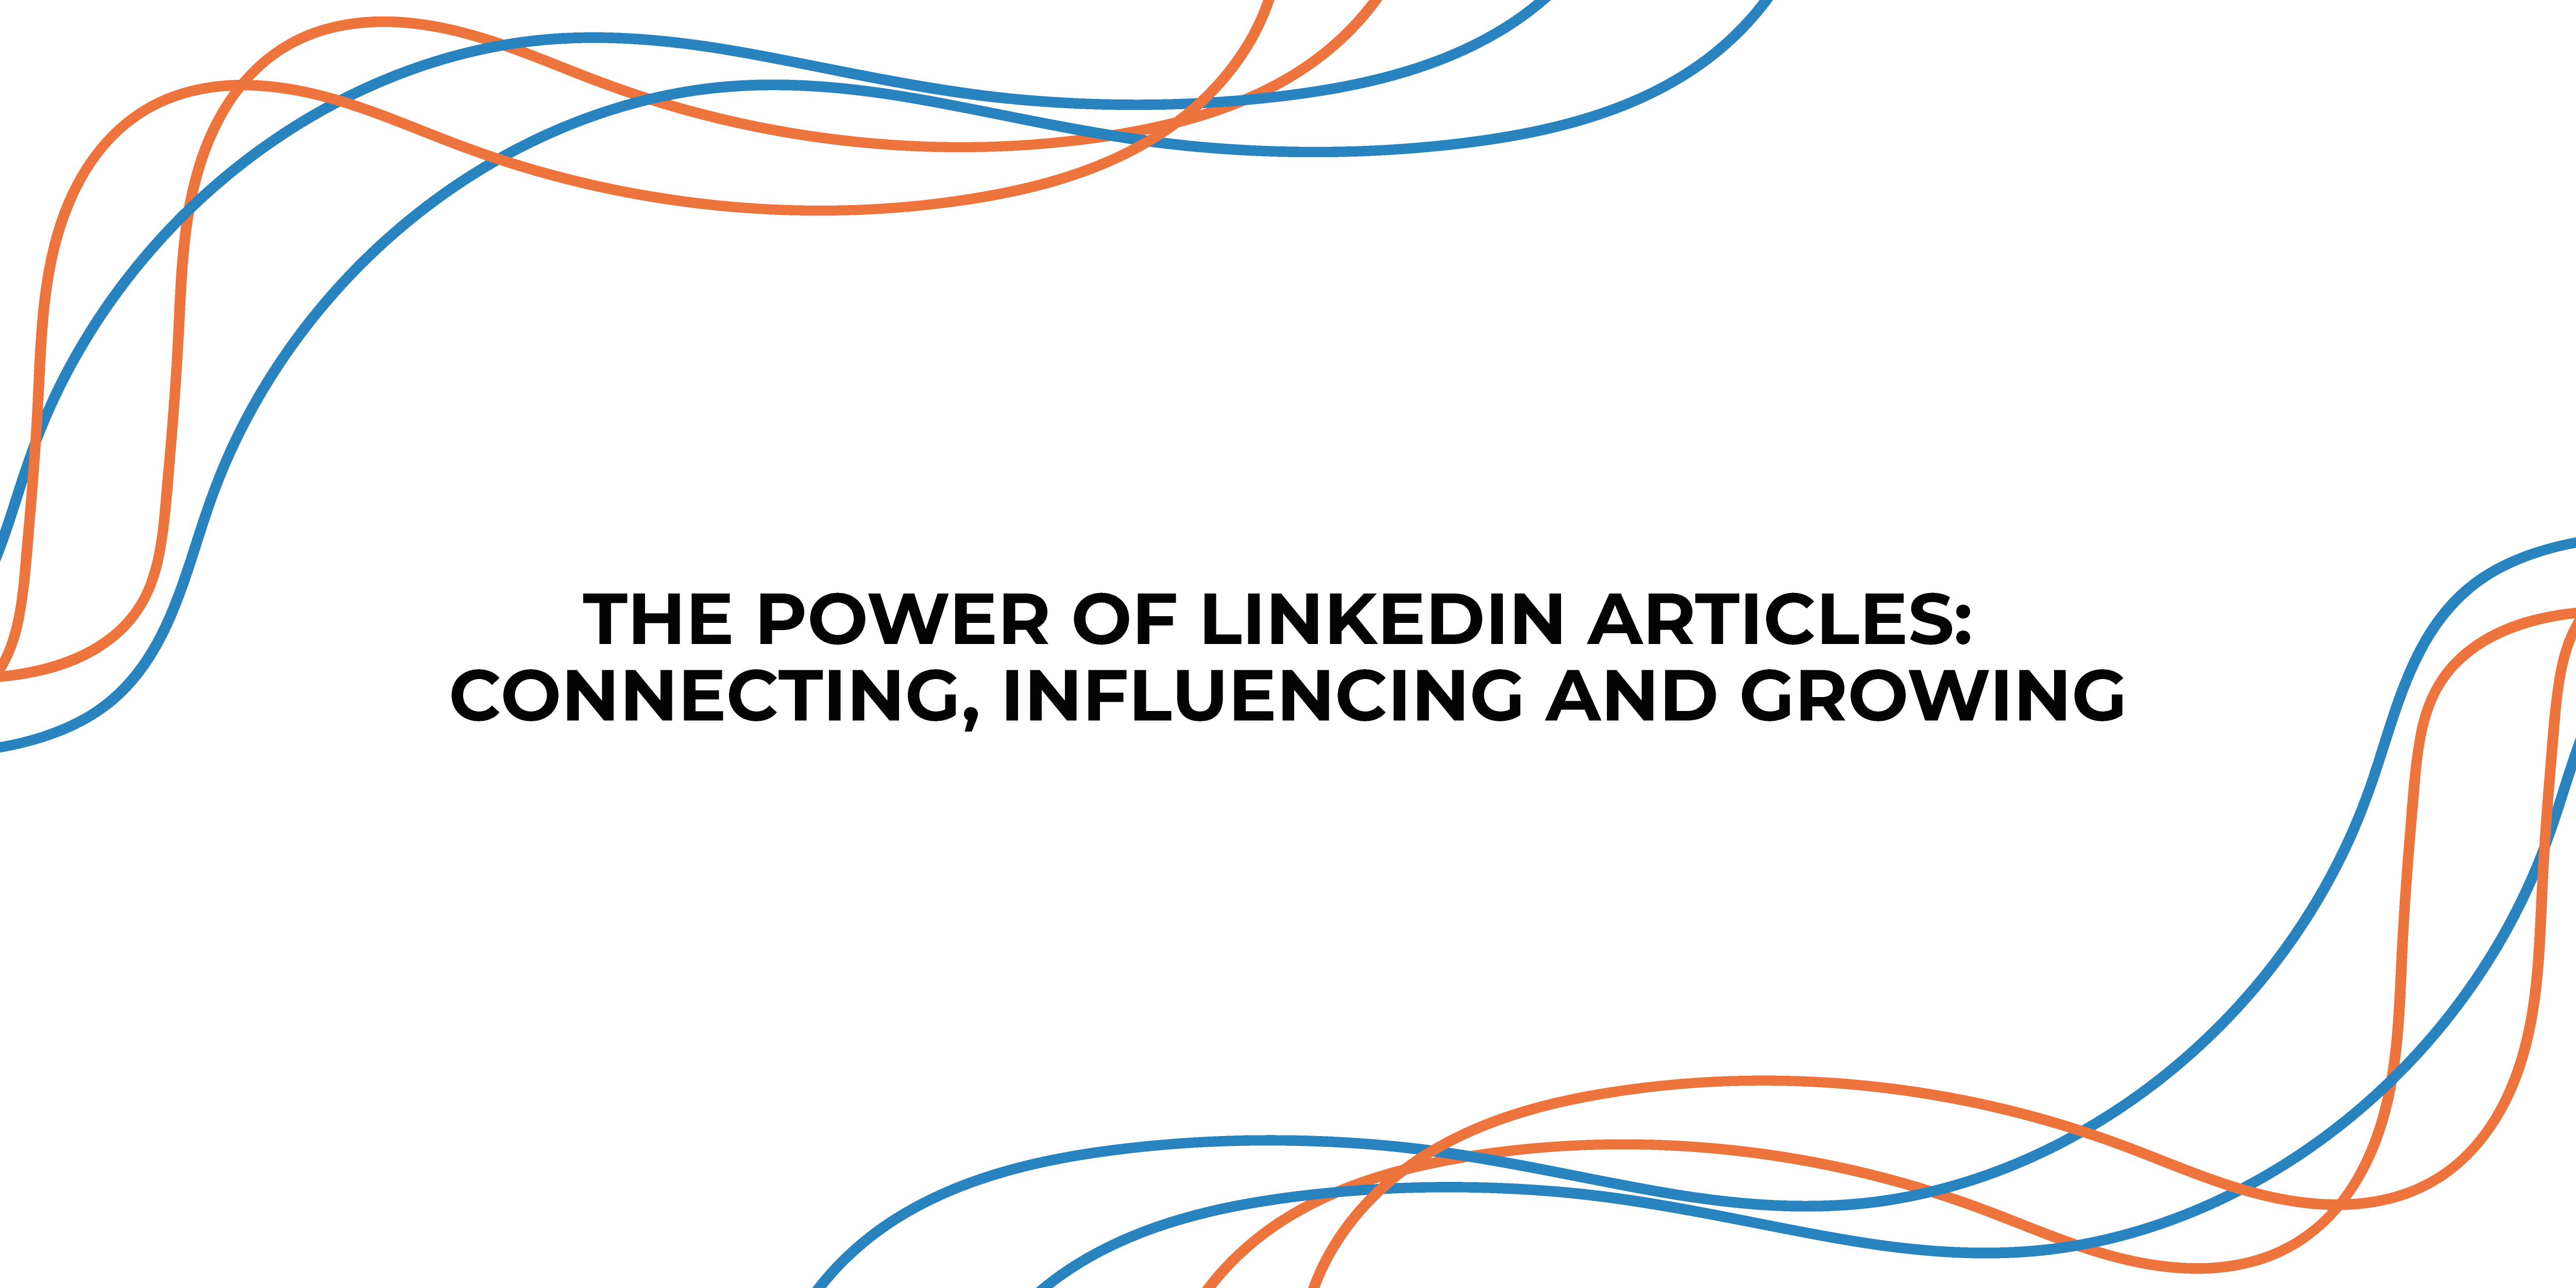 The Power of LinkedIn Articles: Connecting, Influencing, and Growing